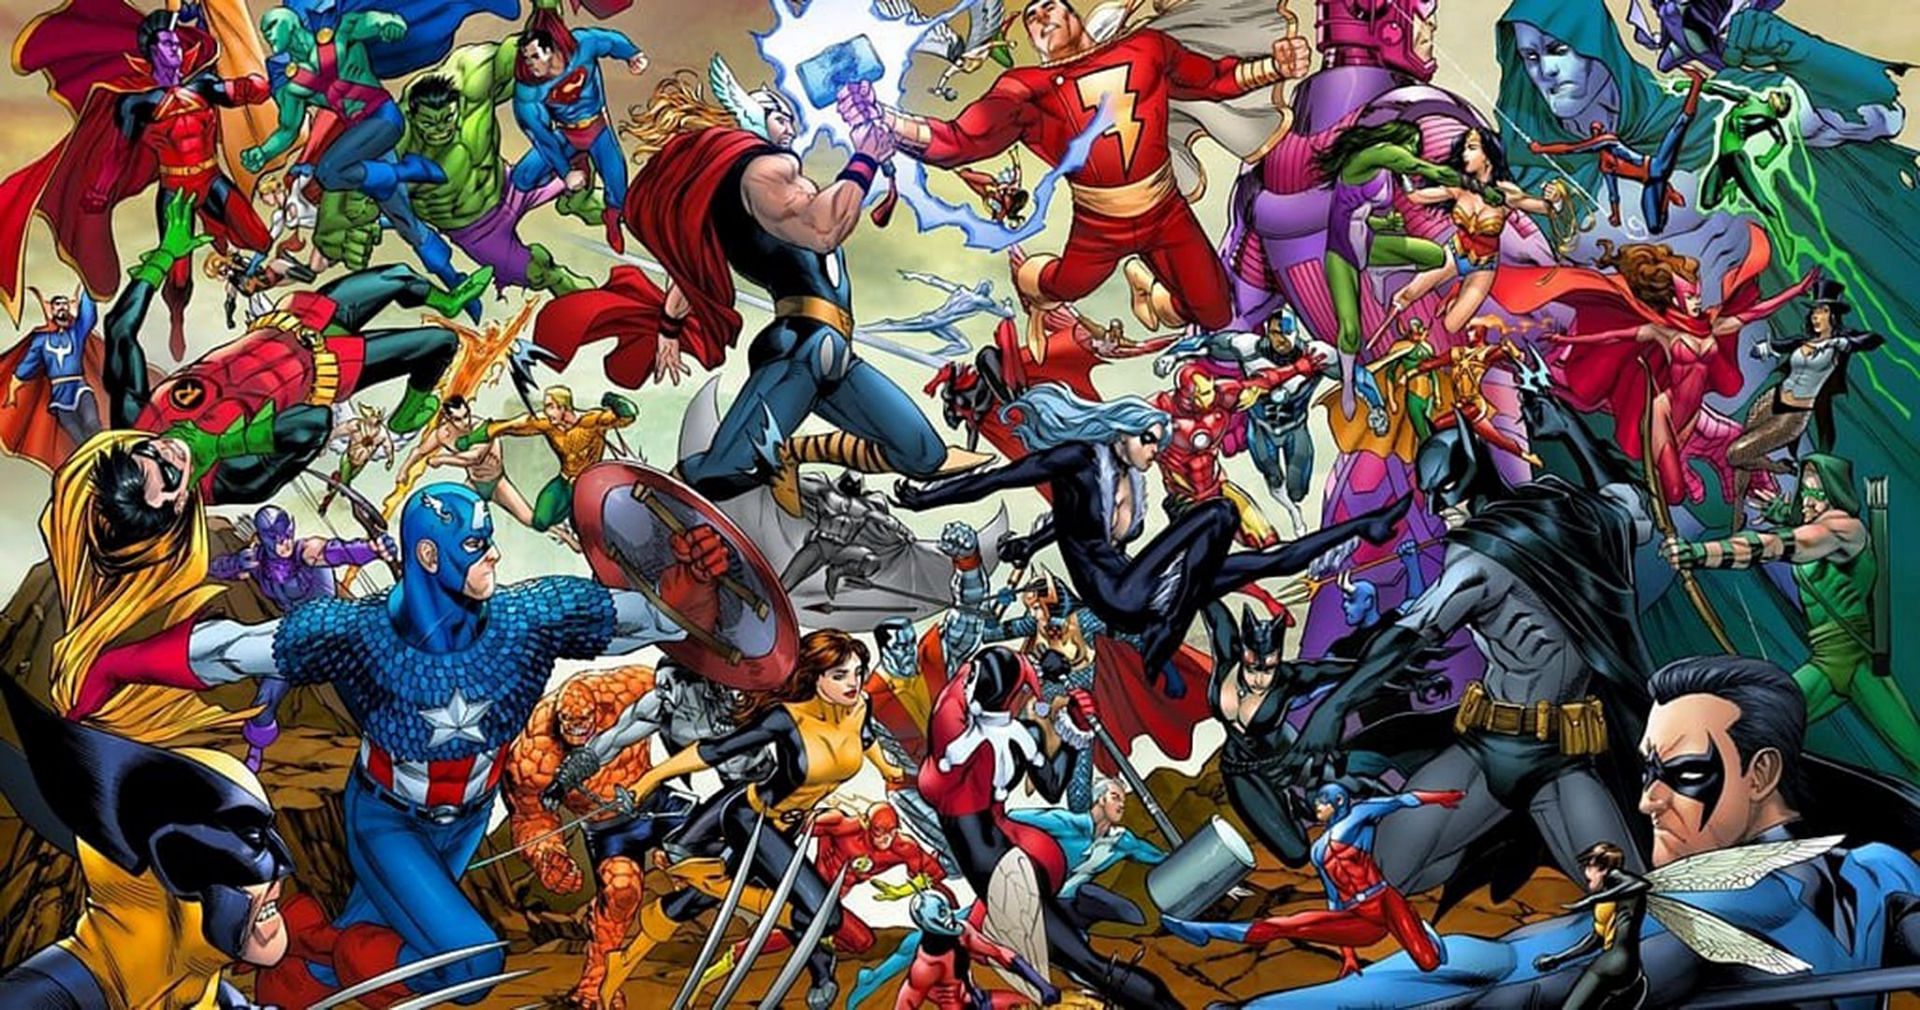 Marvel comics are one of the best sources of entertainment and inspiration for millions of fans around the world. (Image via Marvel)